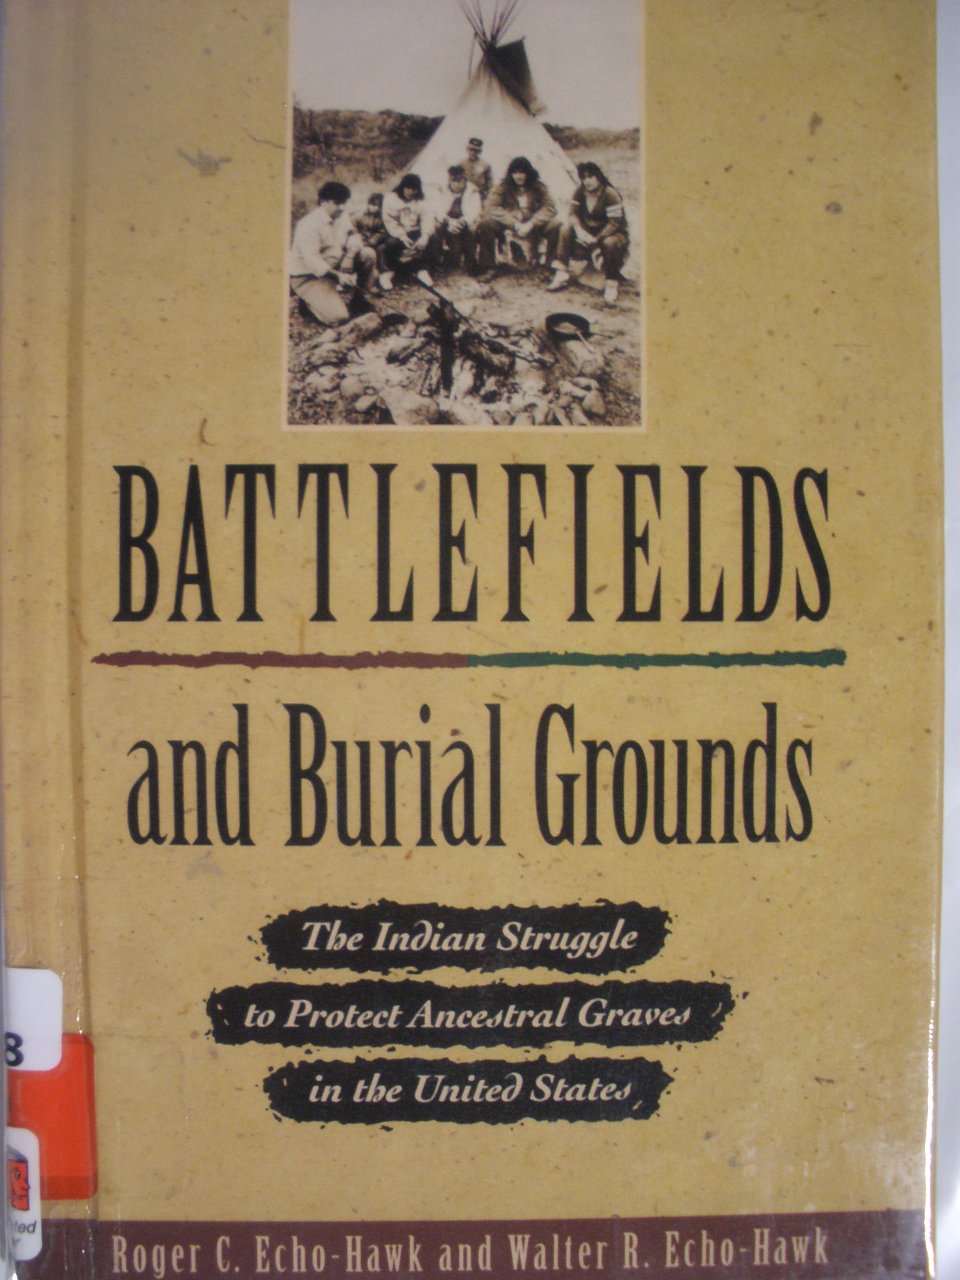 Battlefields and Burial Grounds: The Indian Struggle to Protect Ancestral Graves in the United States